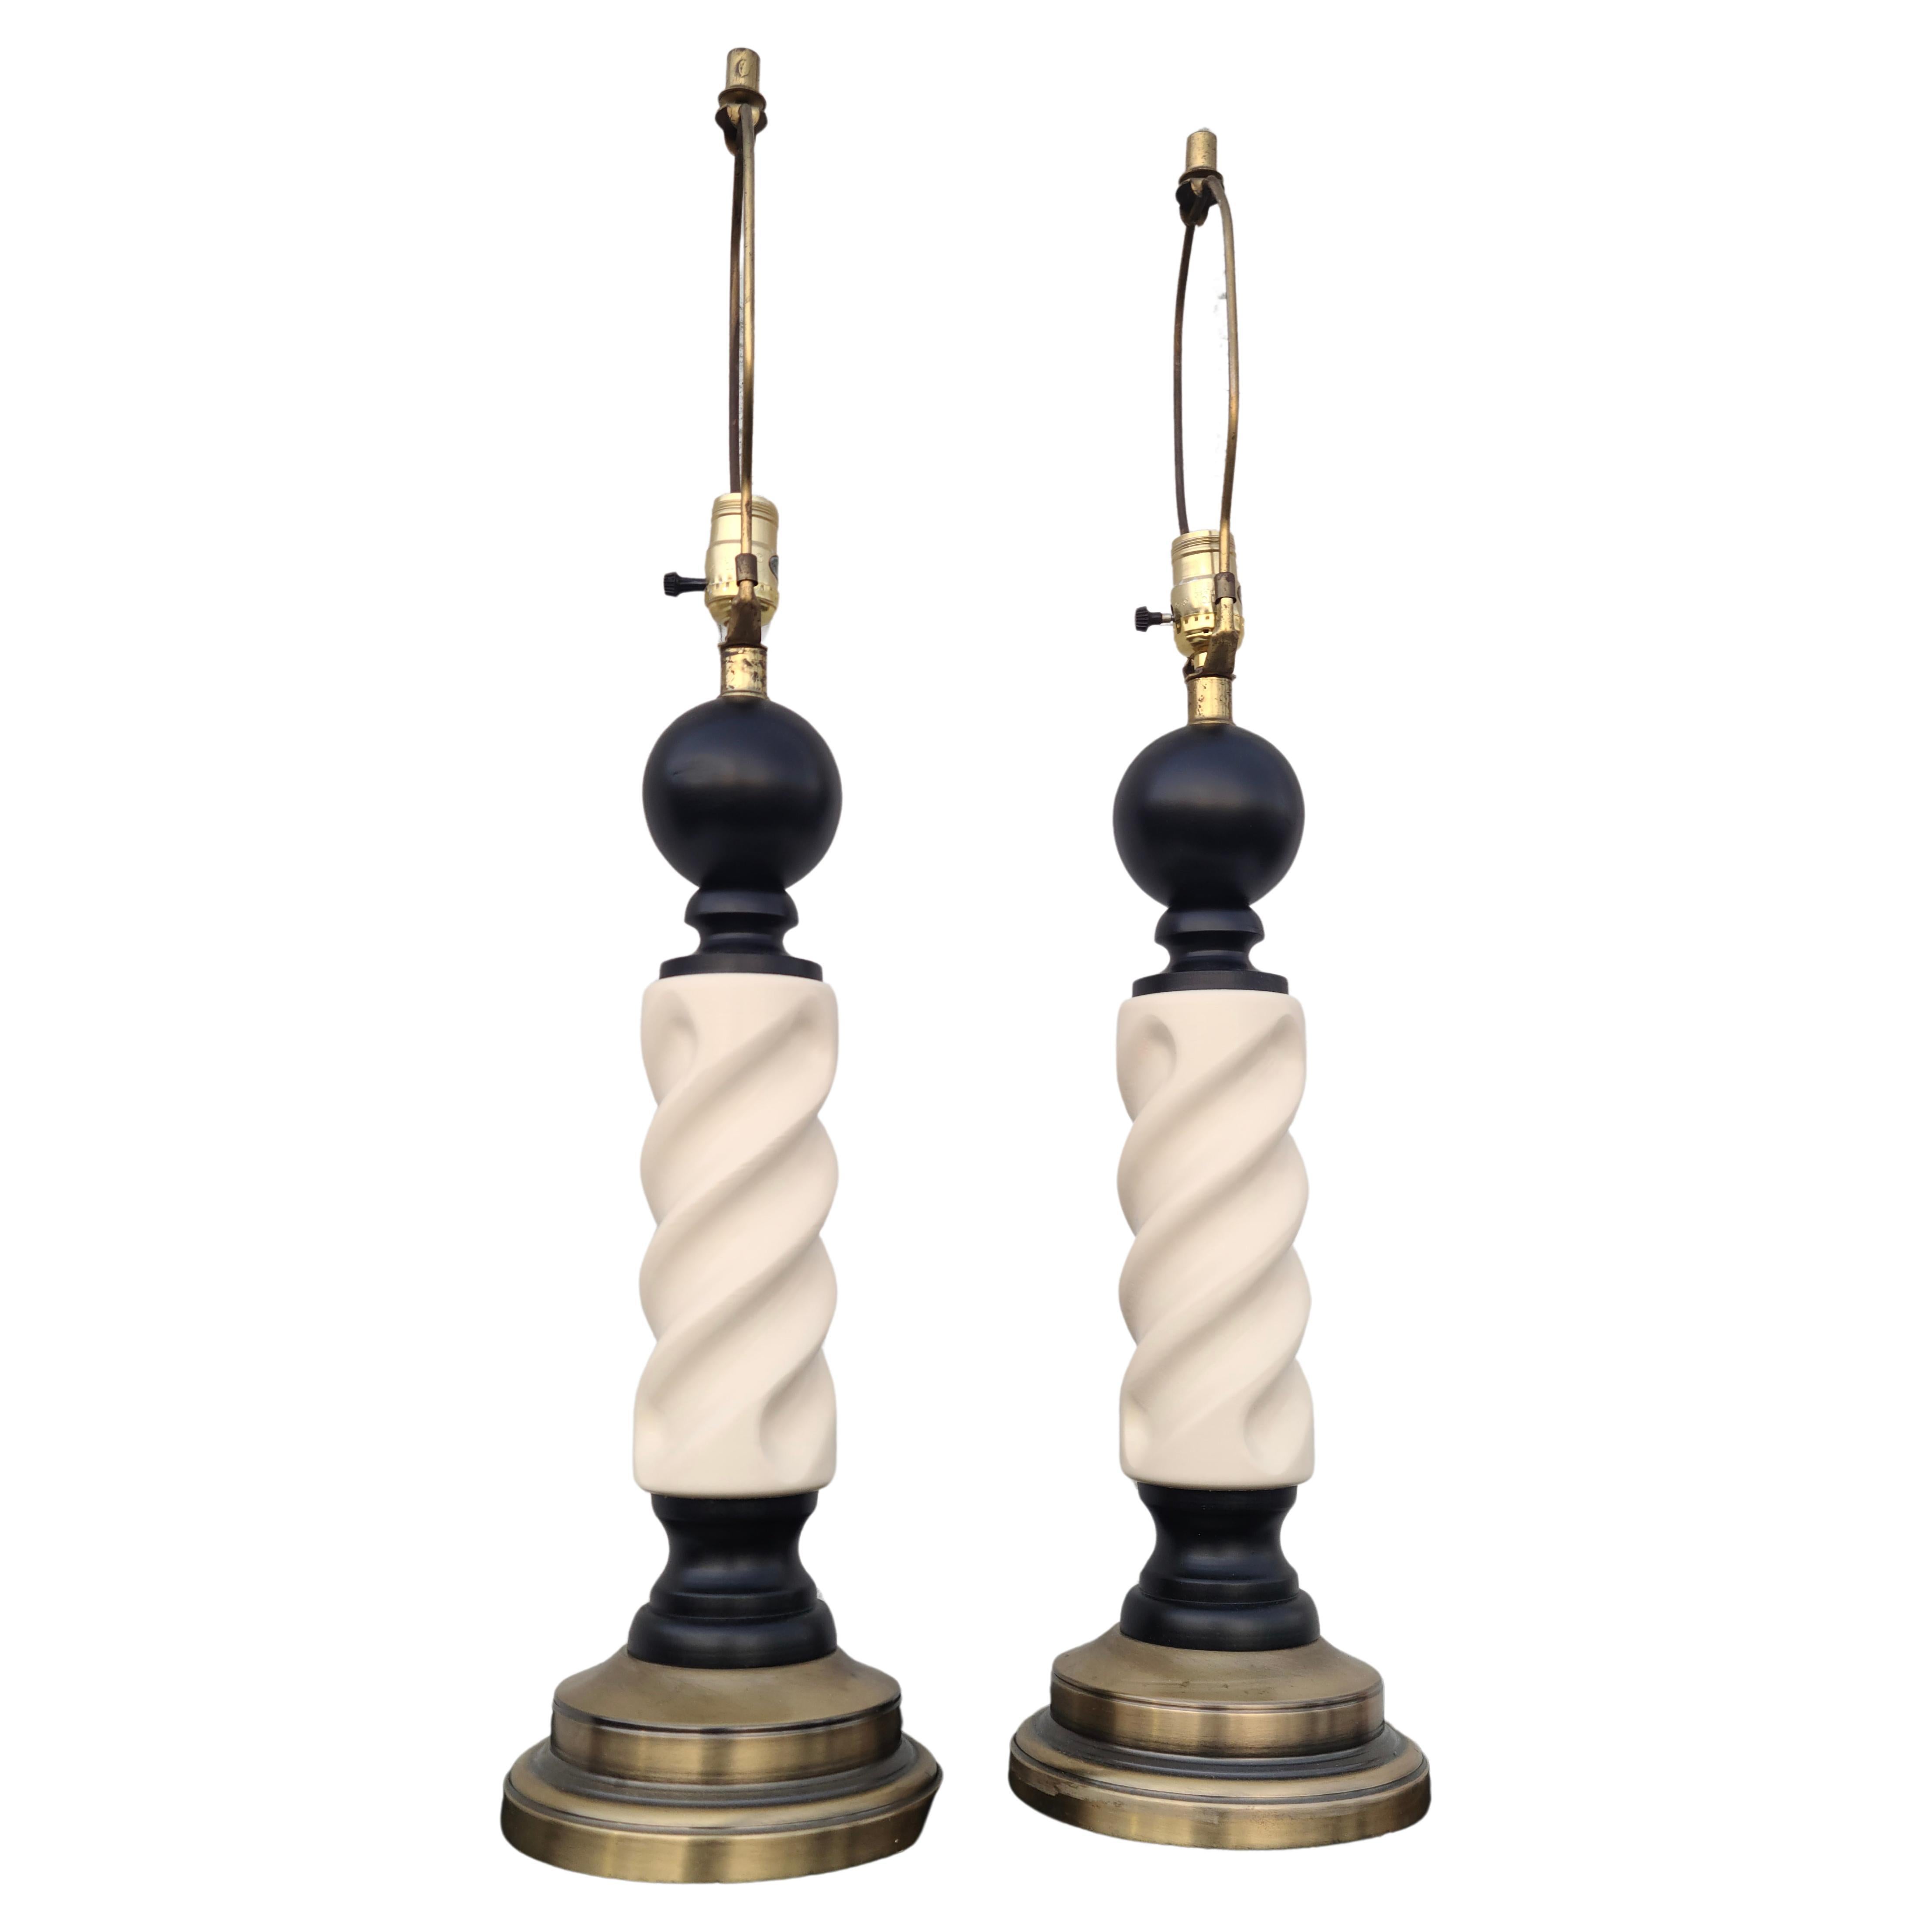 Pair mid-century decorative modern barber pole lamps.
Original antique brass wash base and fittings.
Lacquer has been refreshed.

Medium size body. 32